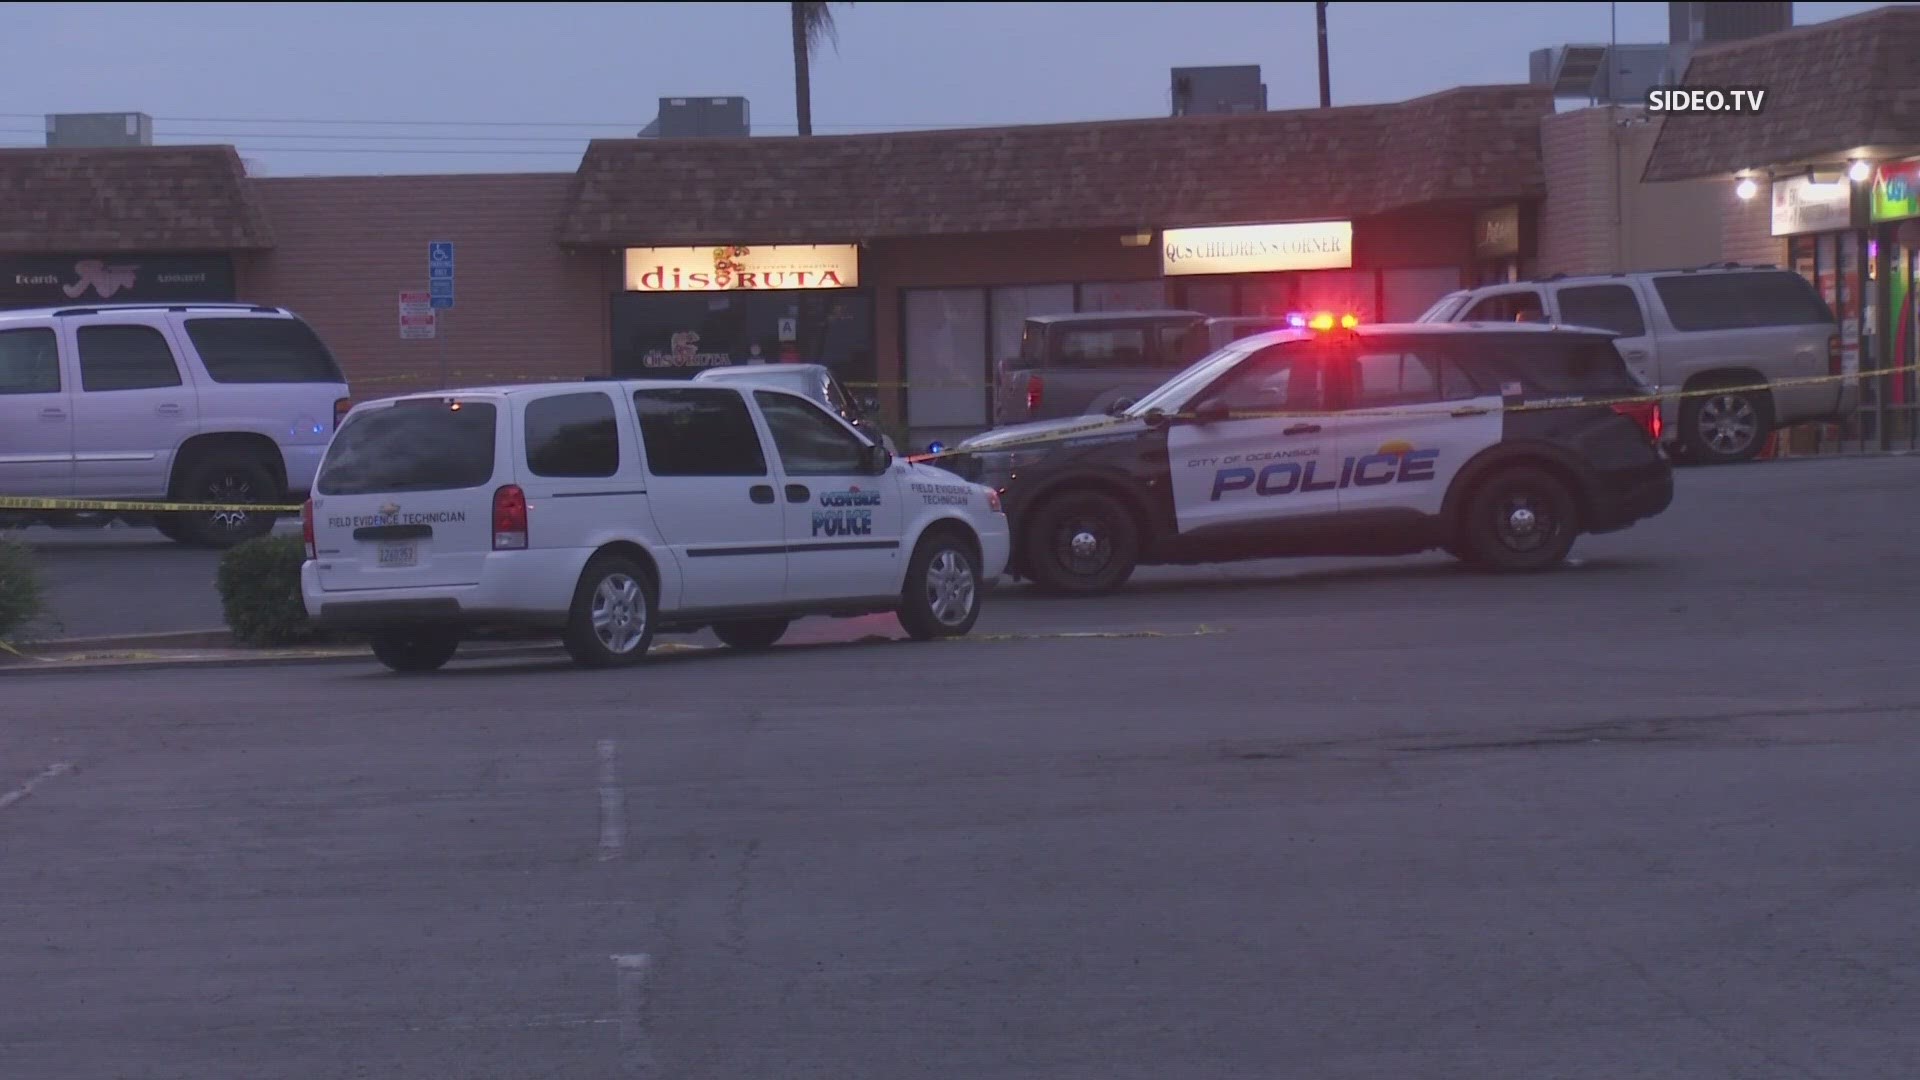 The shooting happened in a parking lot on N Redondo Drive near Vandegrift Boulevard around 4:30 Saturday.